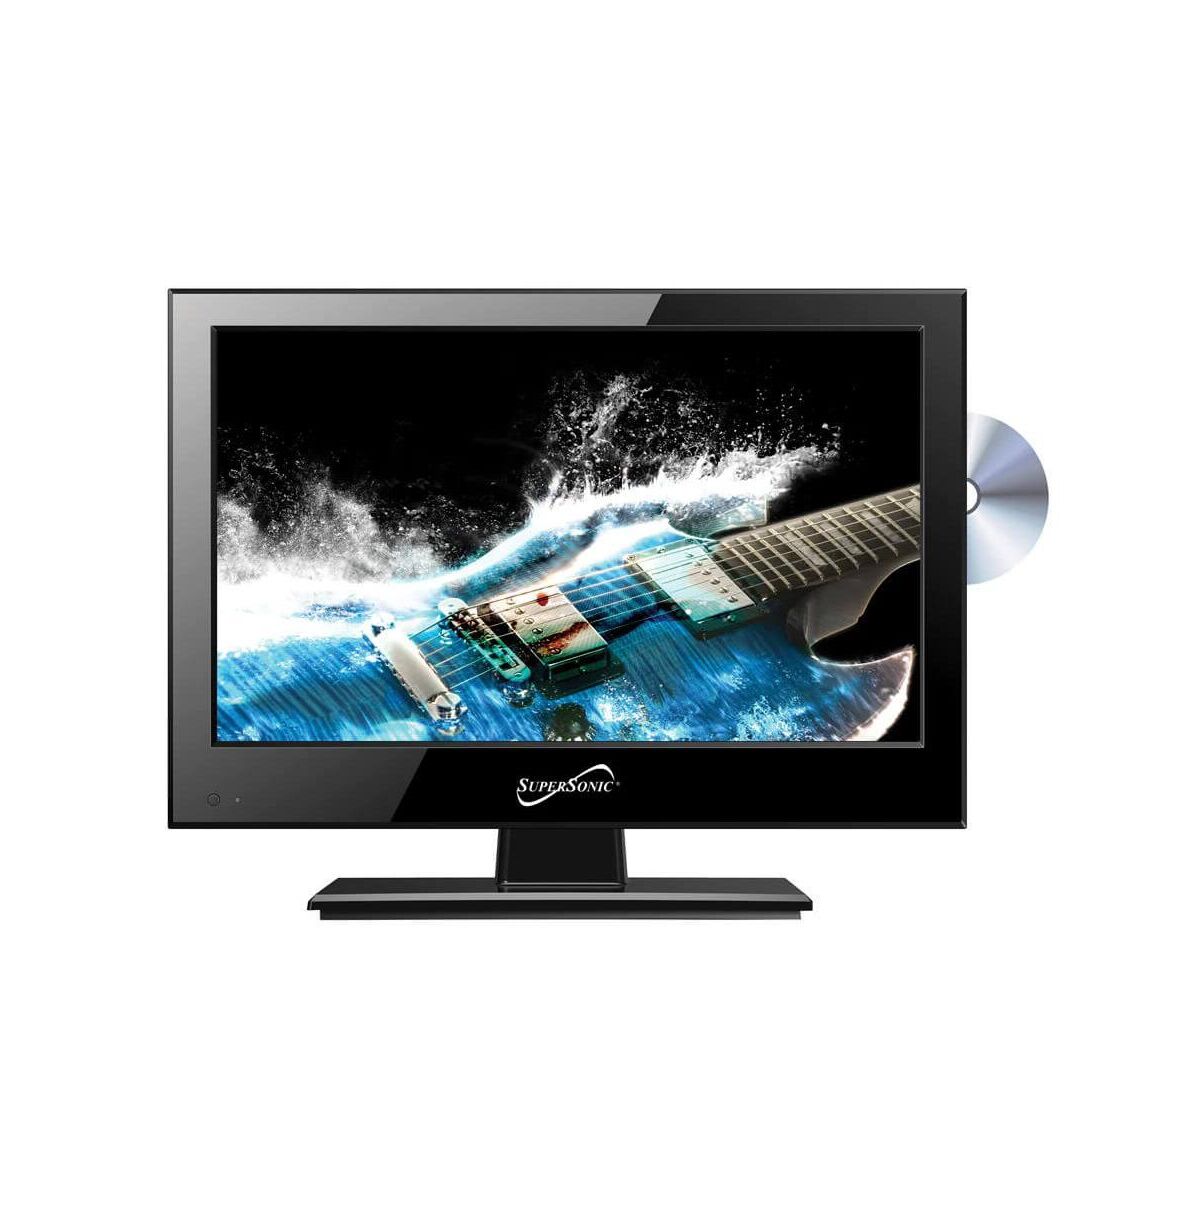 Supersonic 13.3 inch 720p Led Hd Tv with Dvd Player - Black